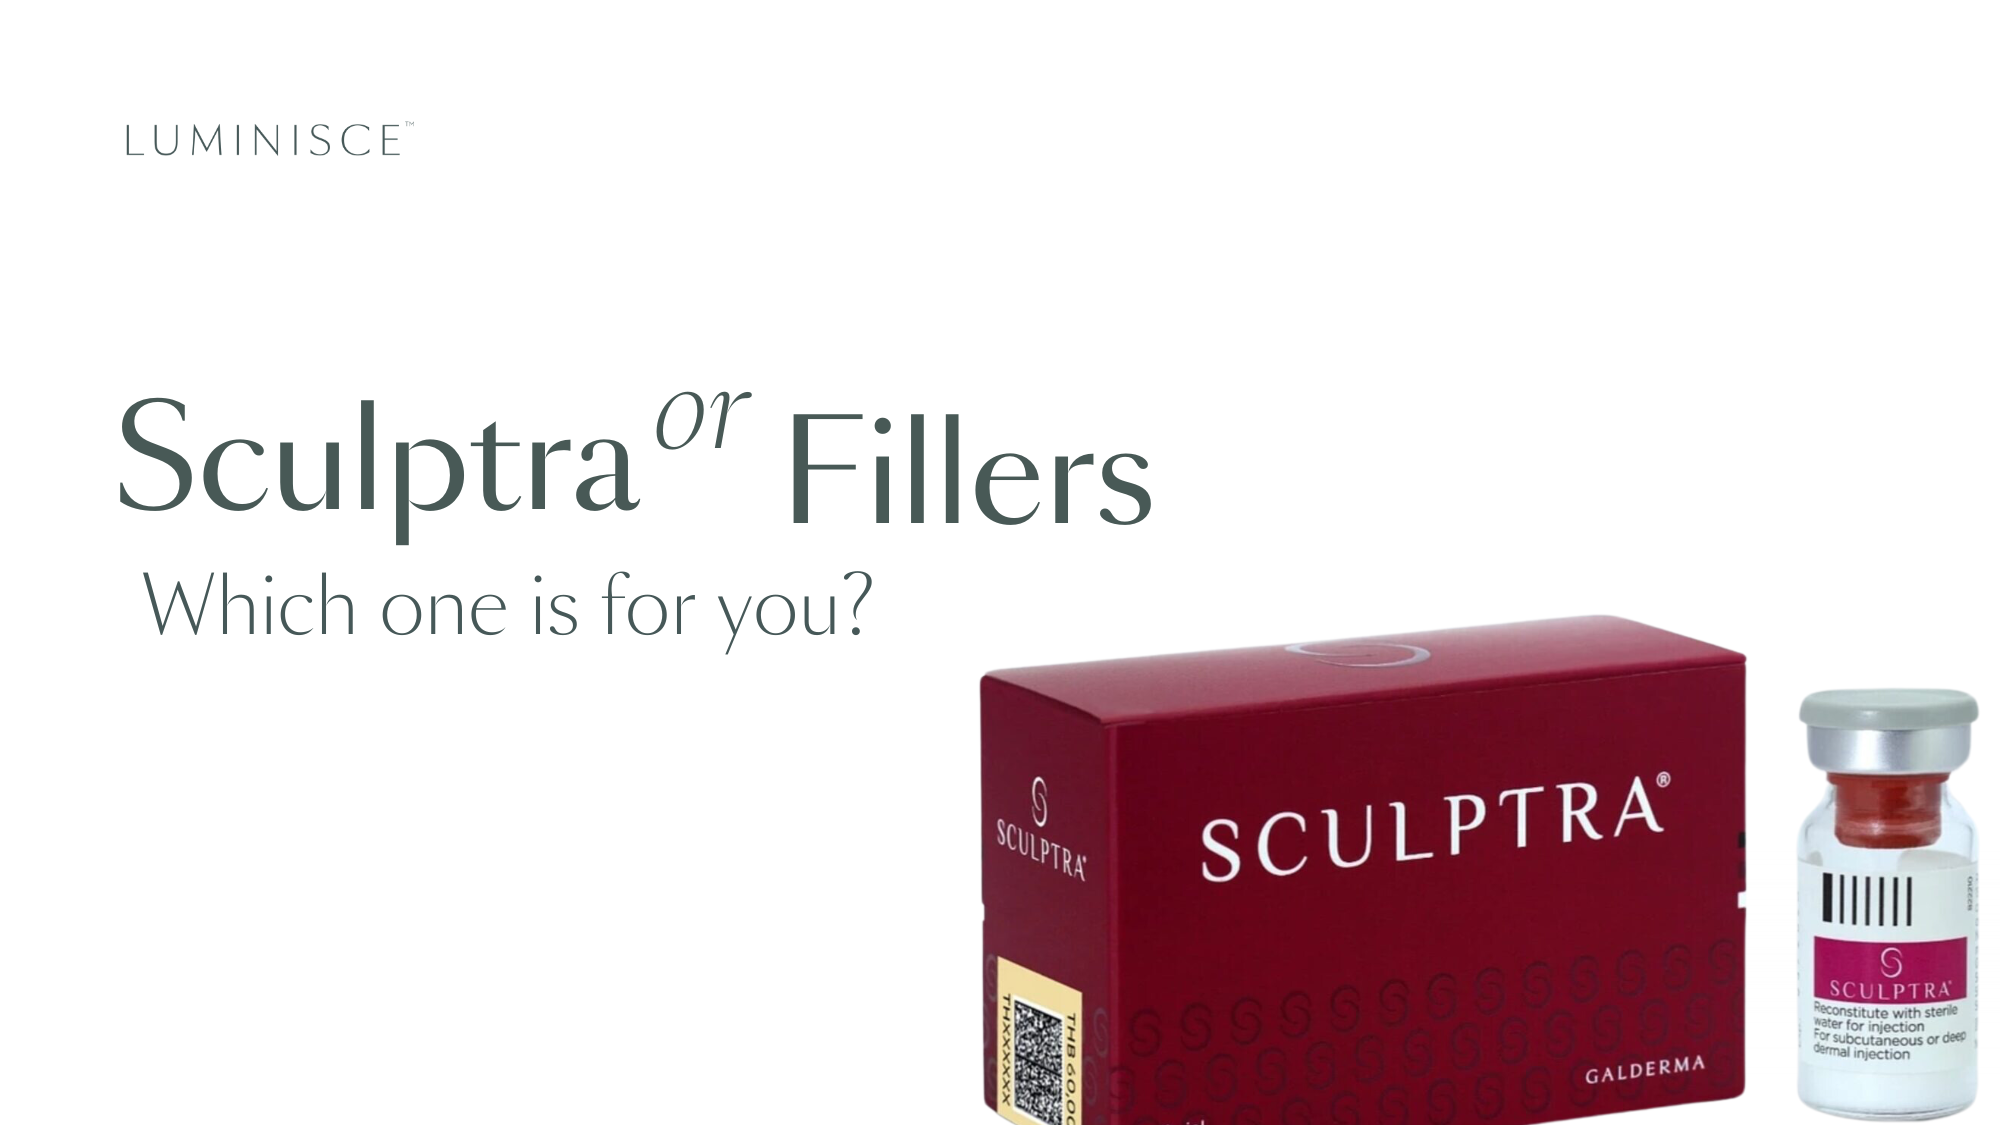 Sculptra or Fillers? Which one is for you?